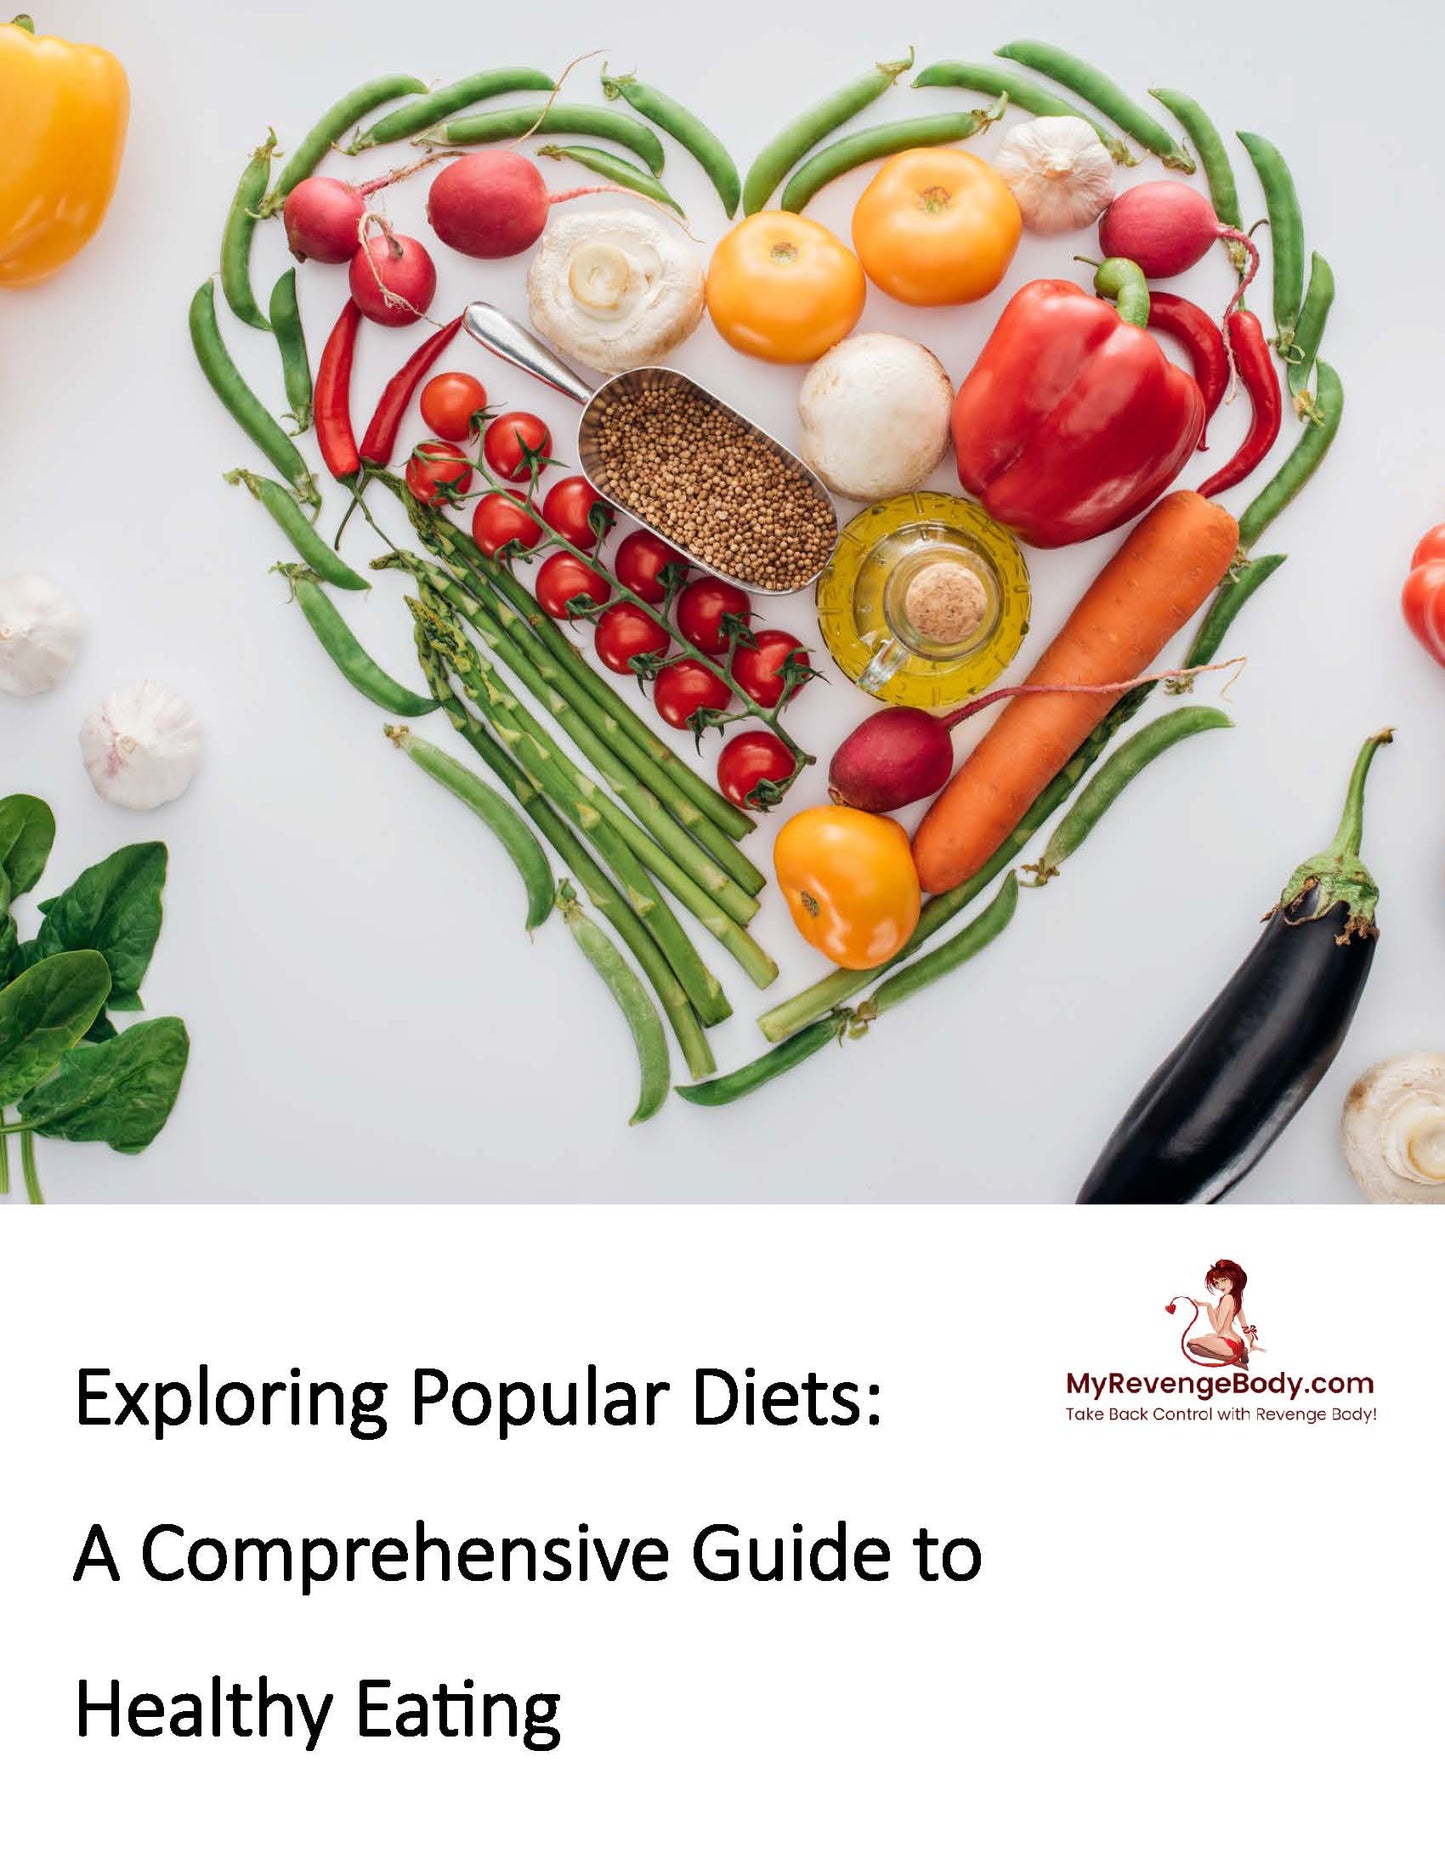 Exploring Popular Diets: A Comprehensive Guide to Healthy Eating